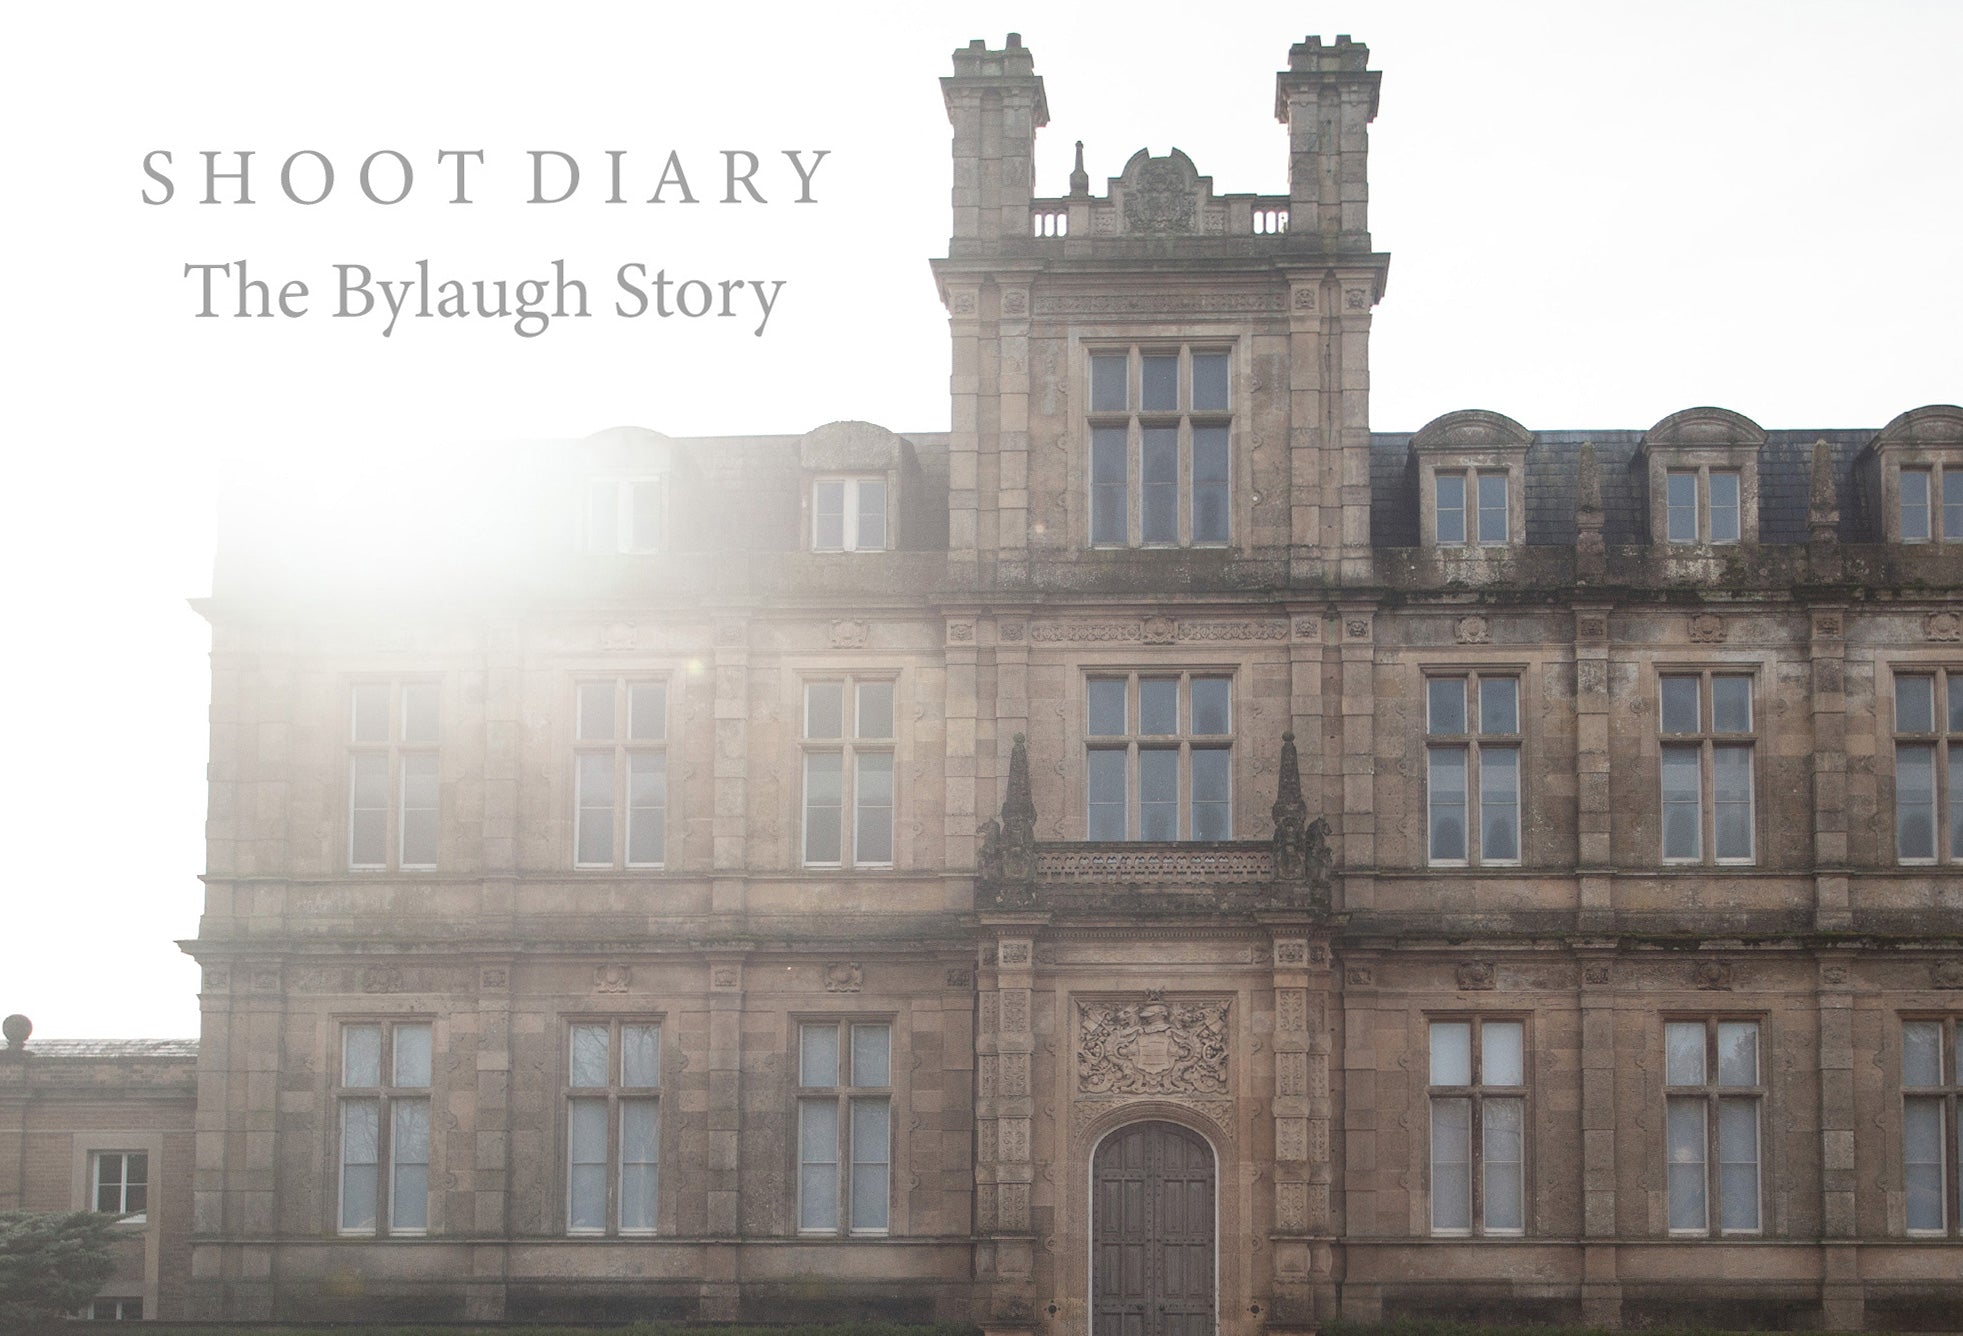 Photoshoot Diary: The Bylaugh Story